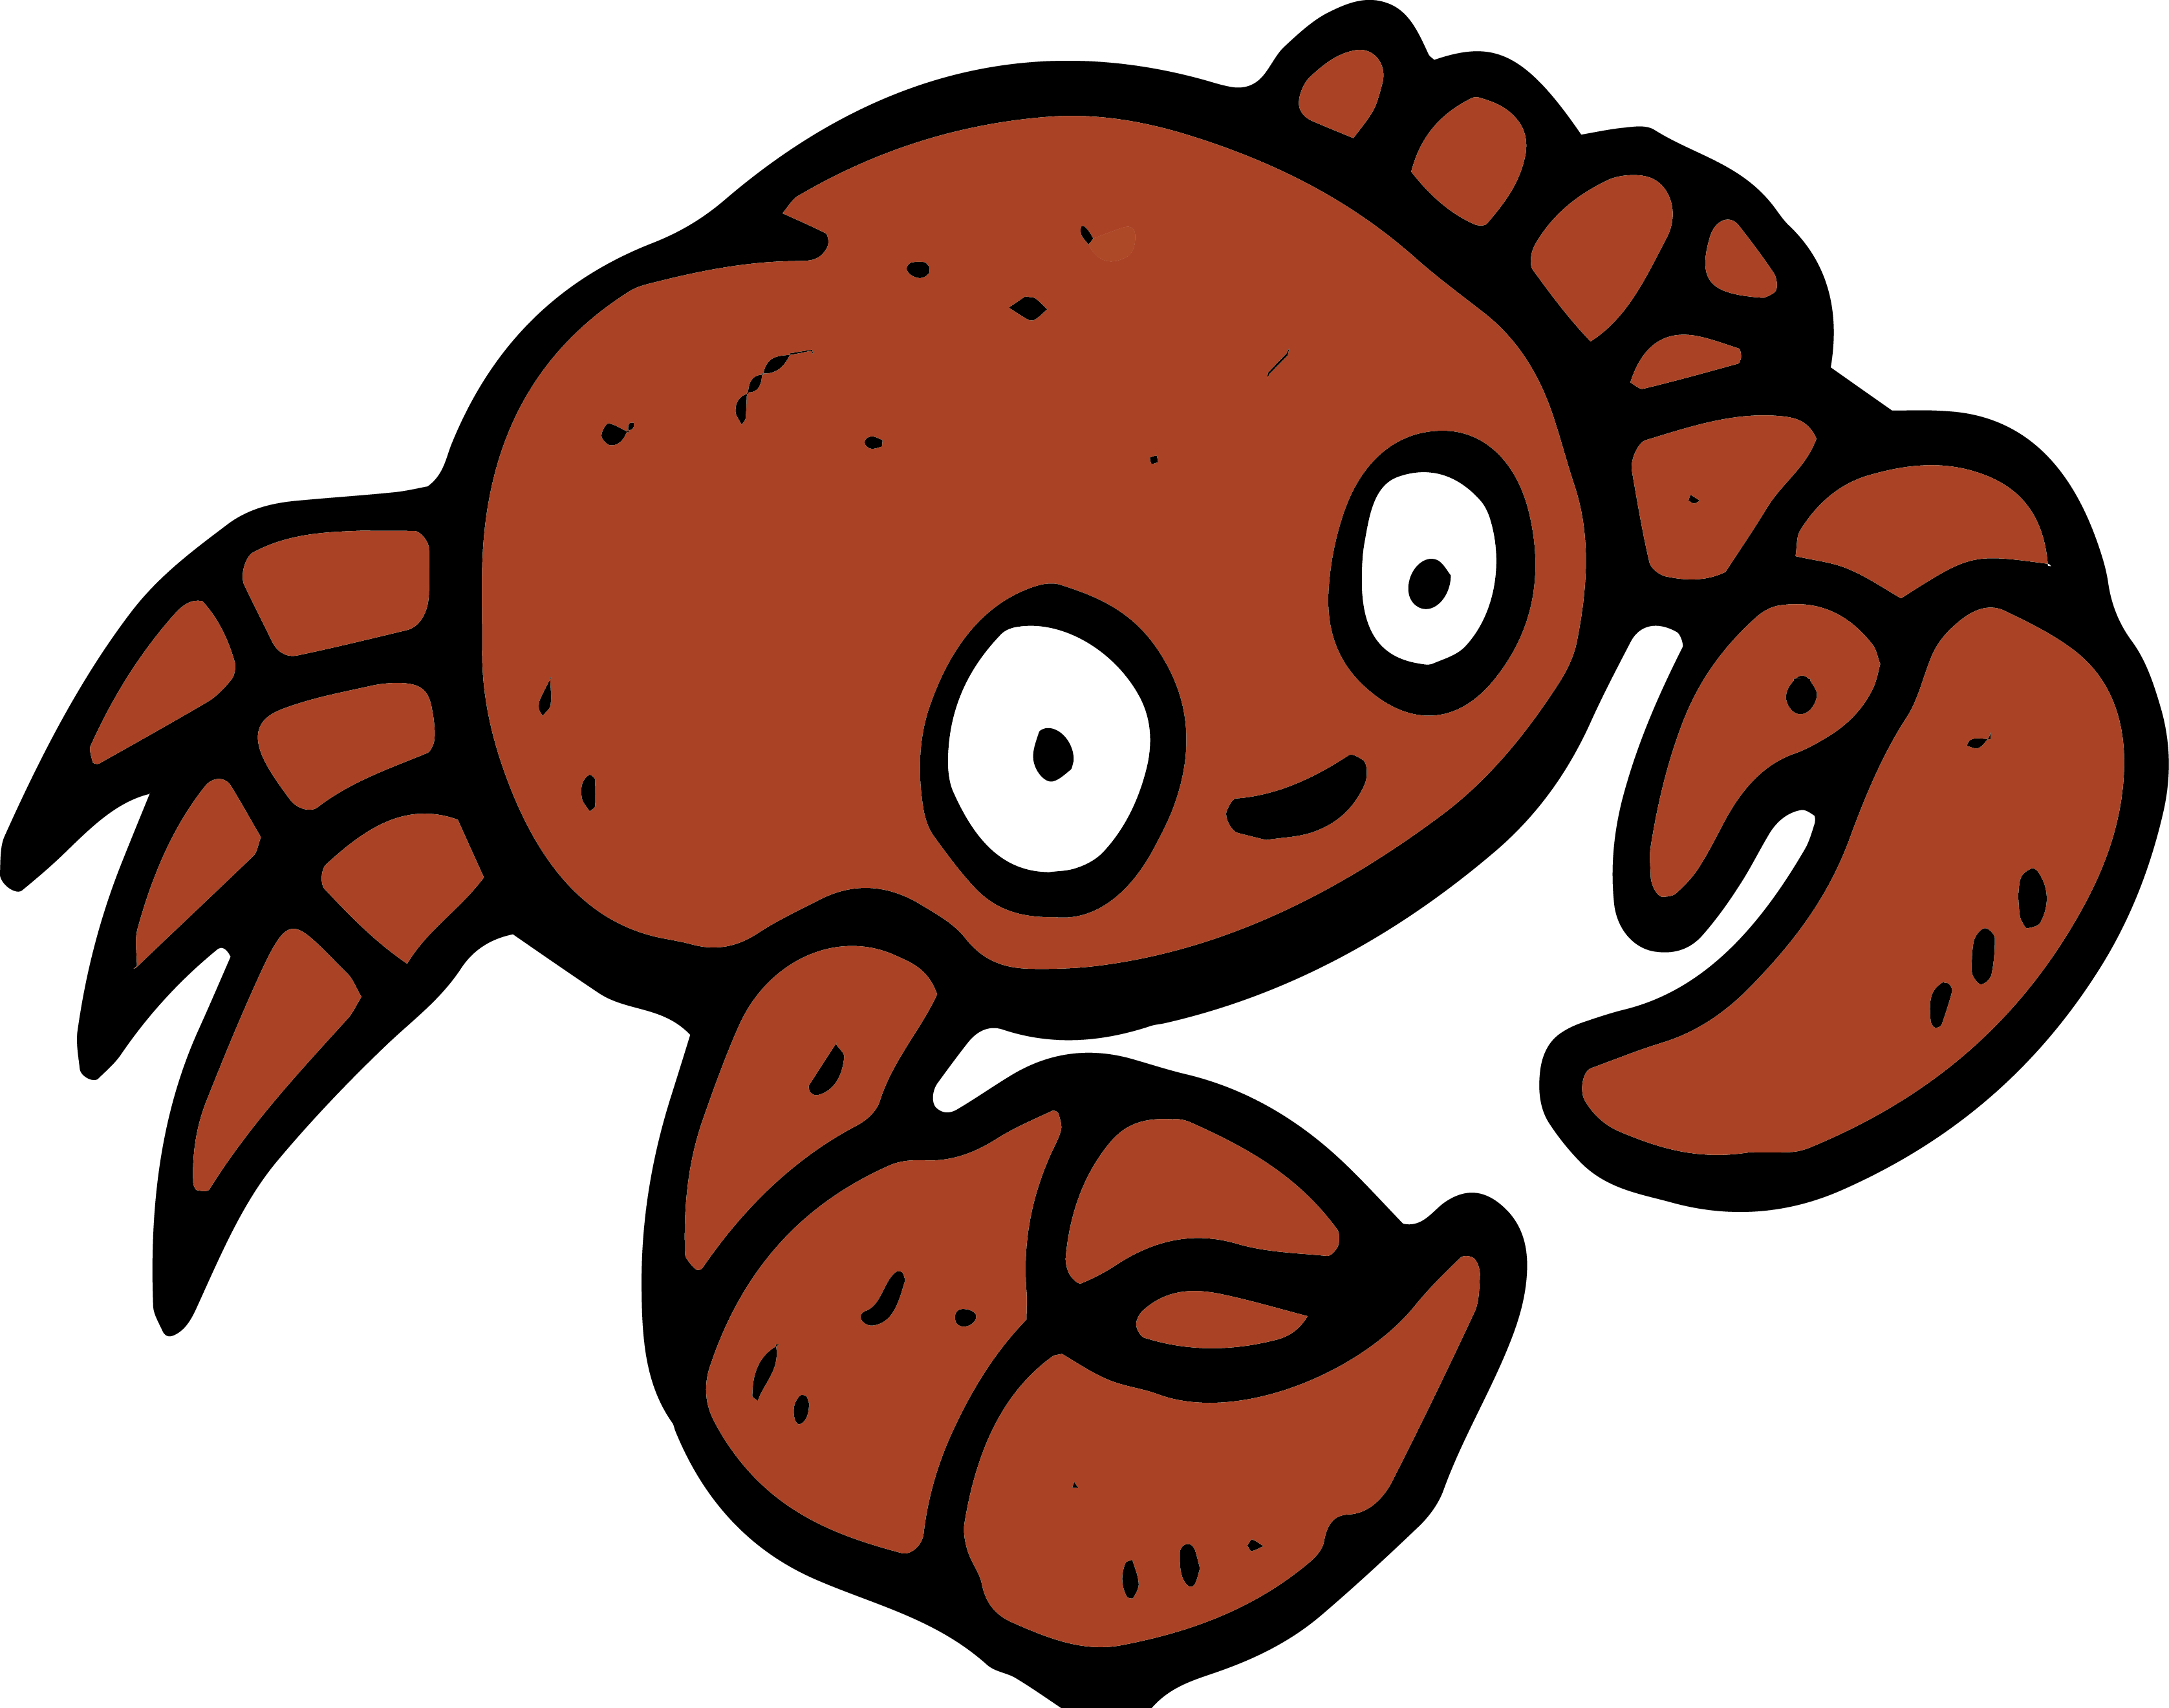 seafood clipart king crab